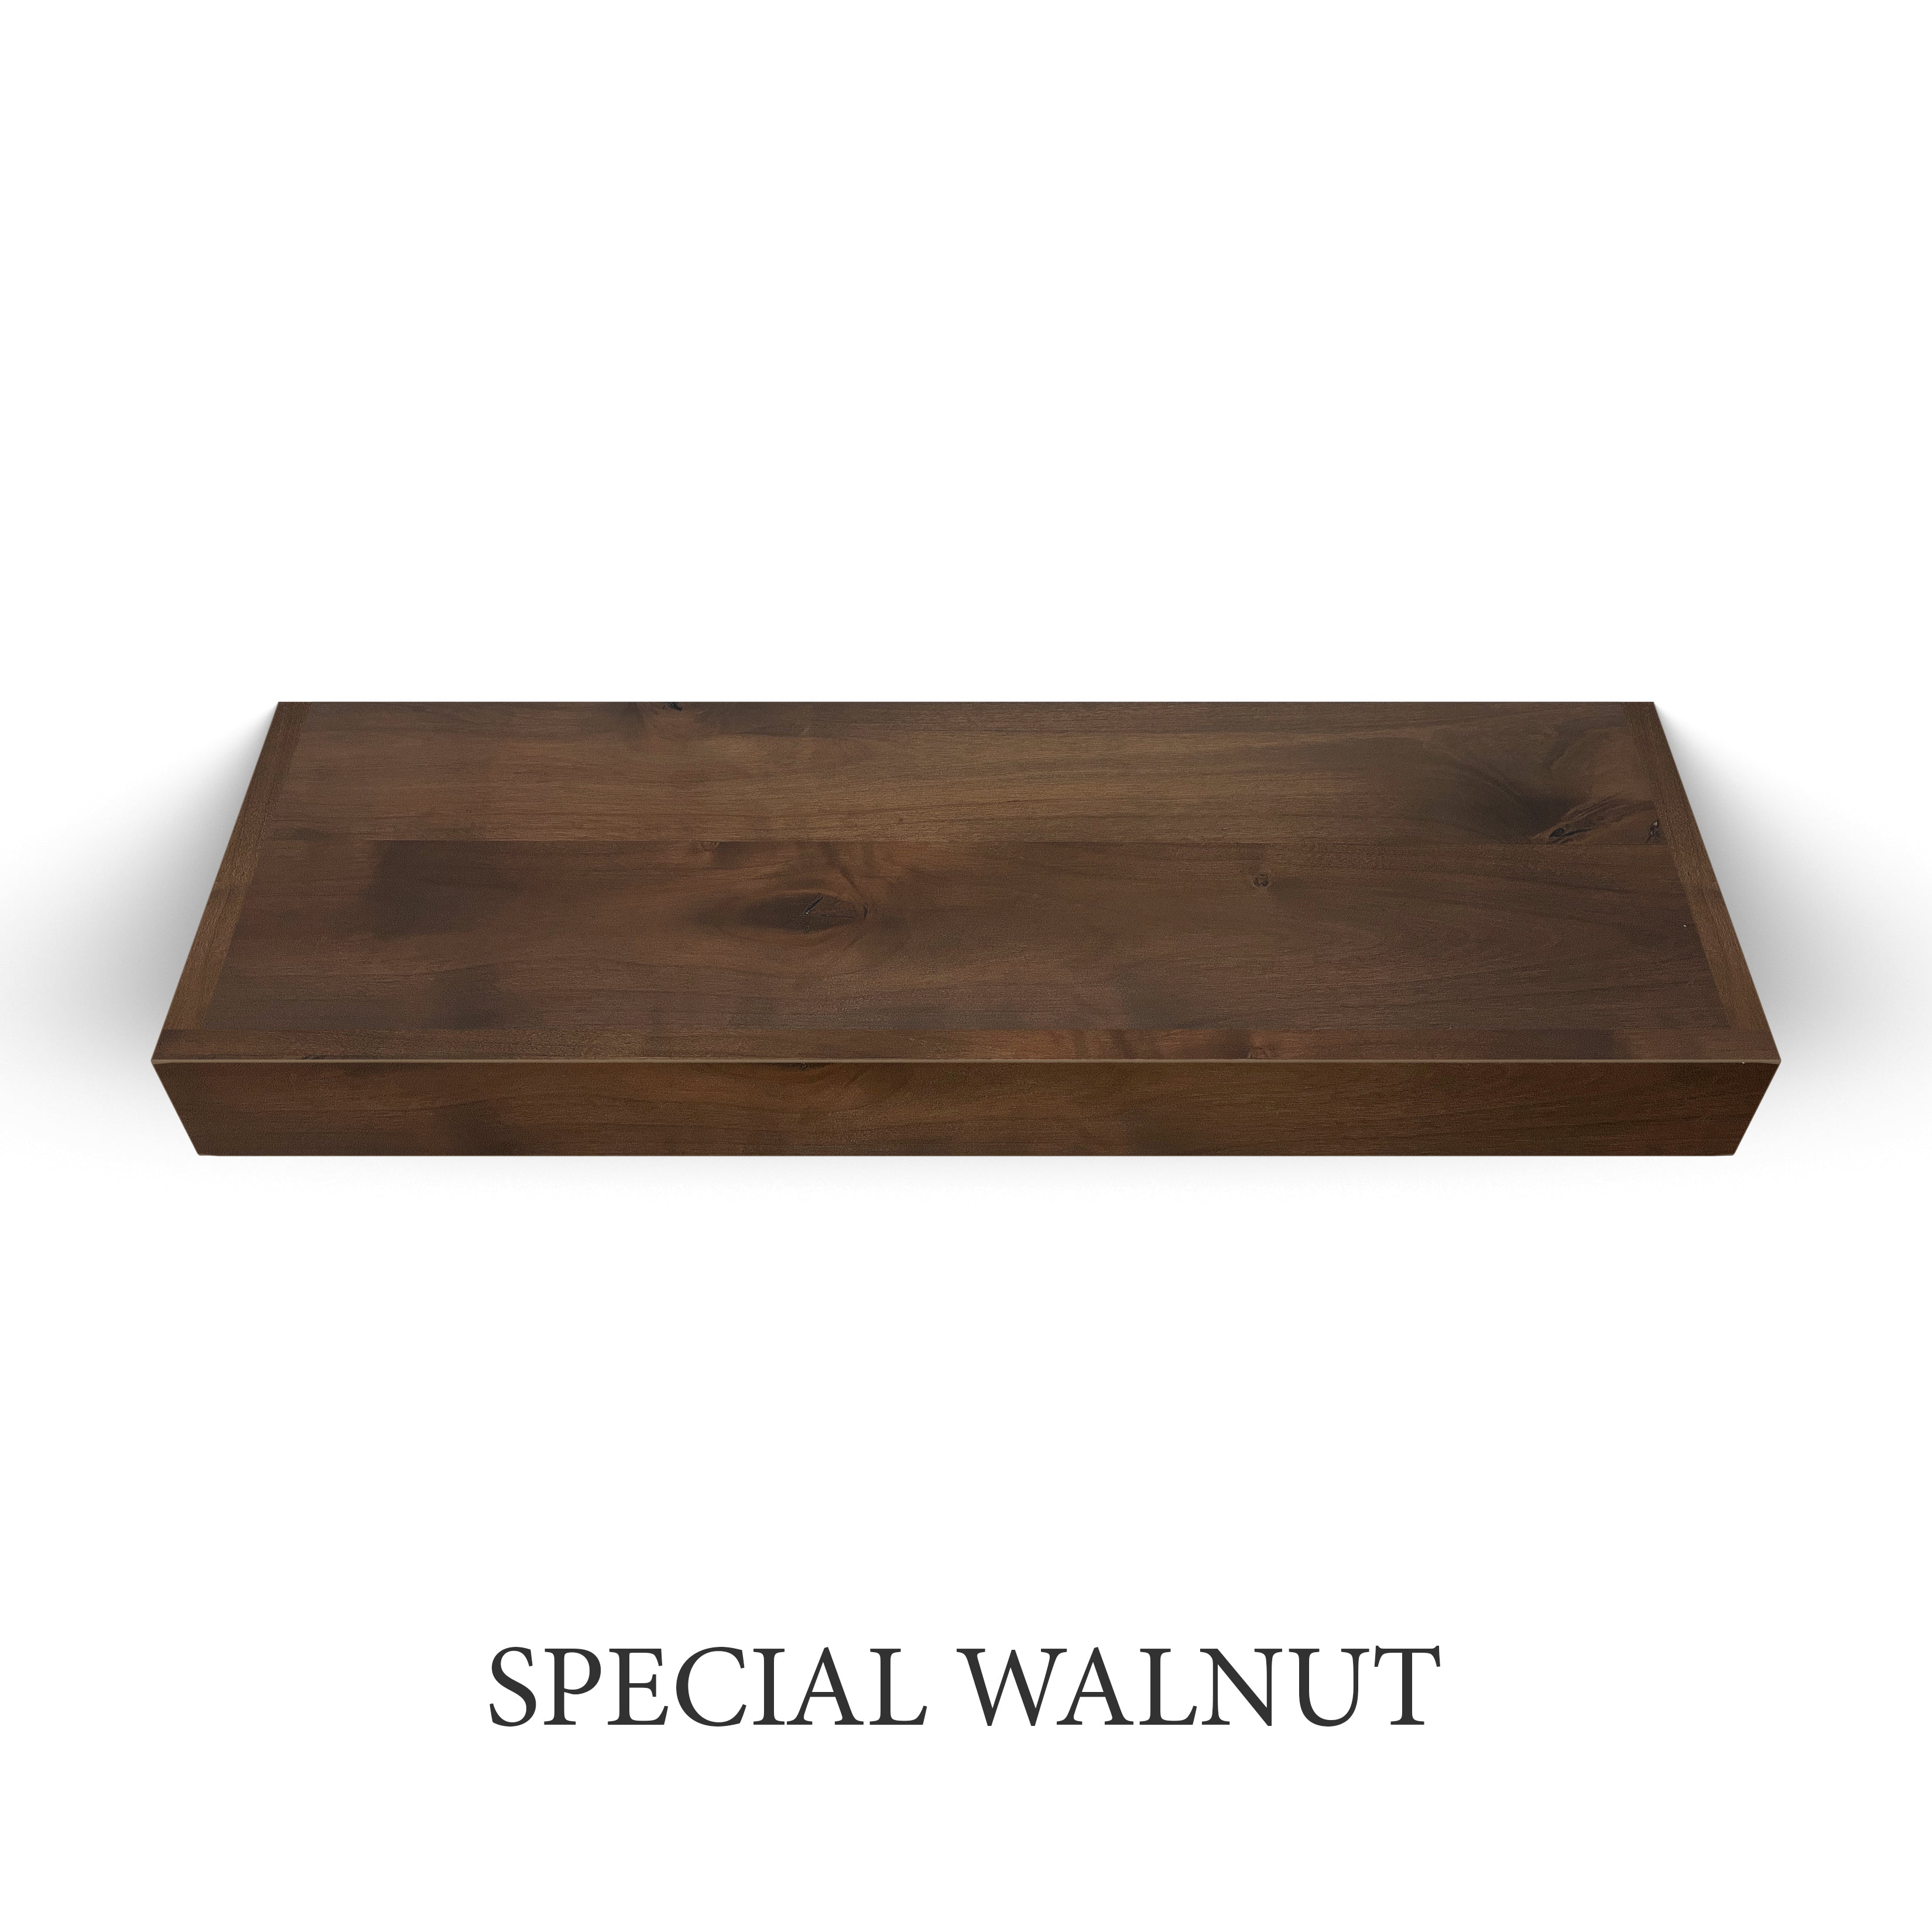 special walnut Rustic Alder 3 Inch Thick LED Lighted Floating Shelf - Hardwired